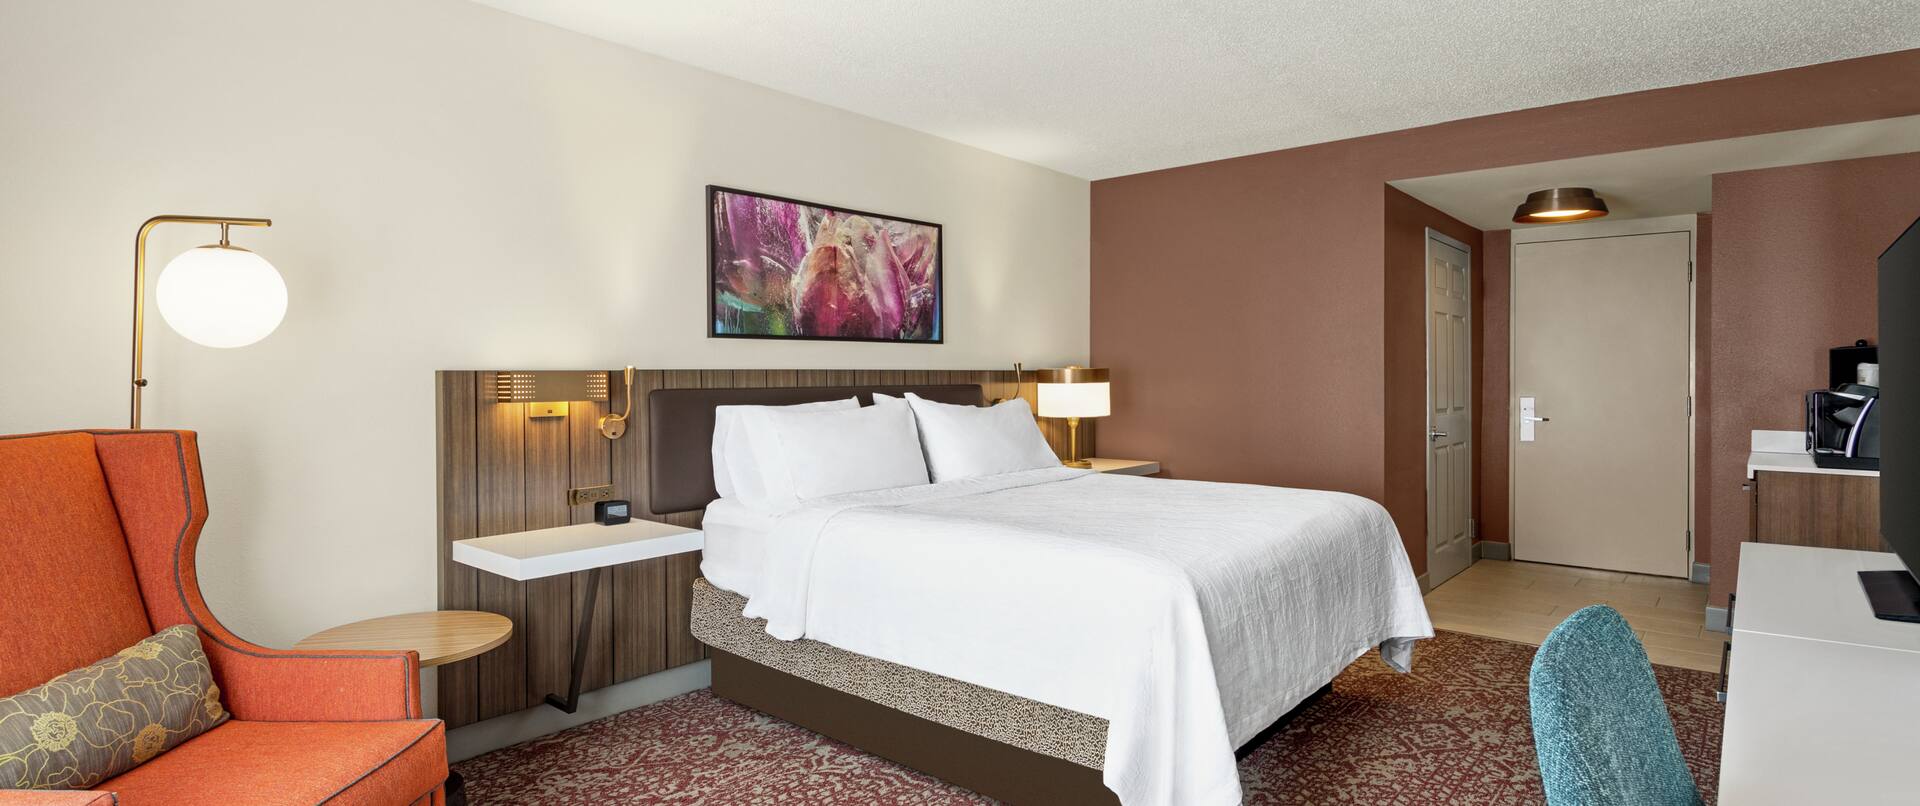 Spacious guest room featuring comfortable king bed, work desk, and TV.